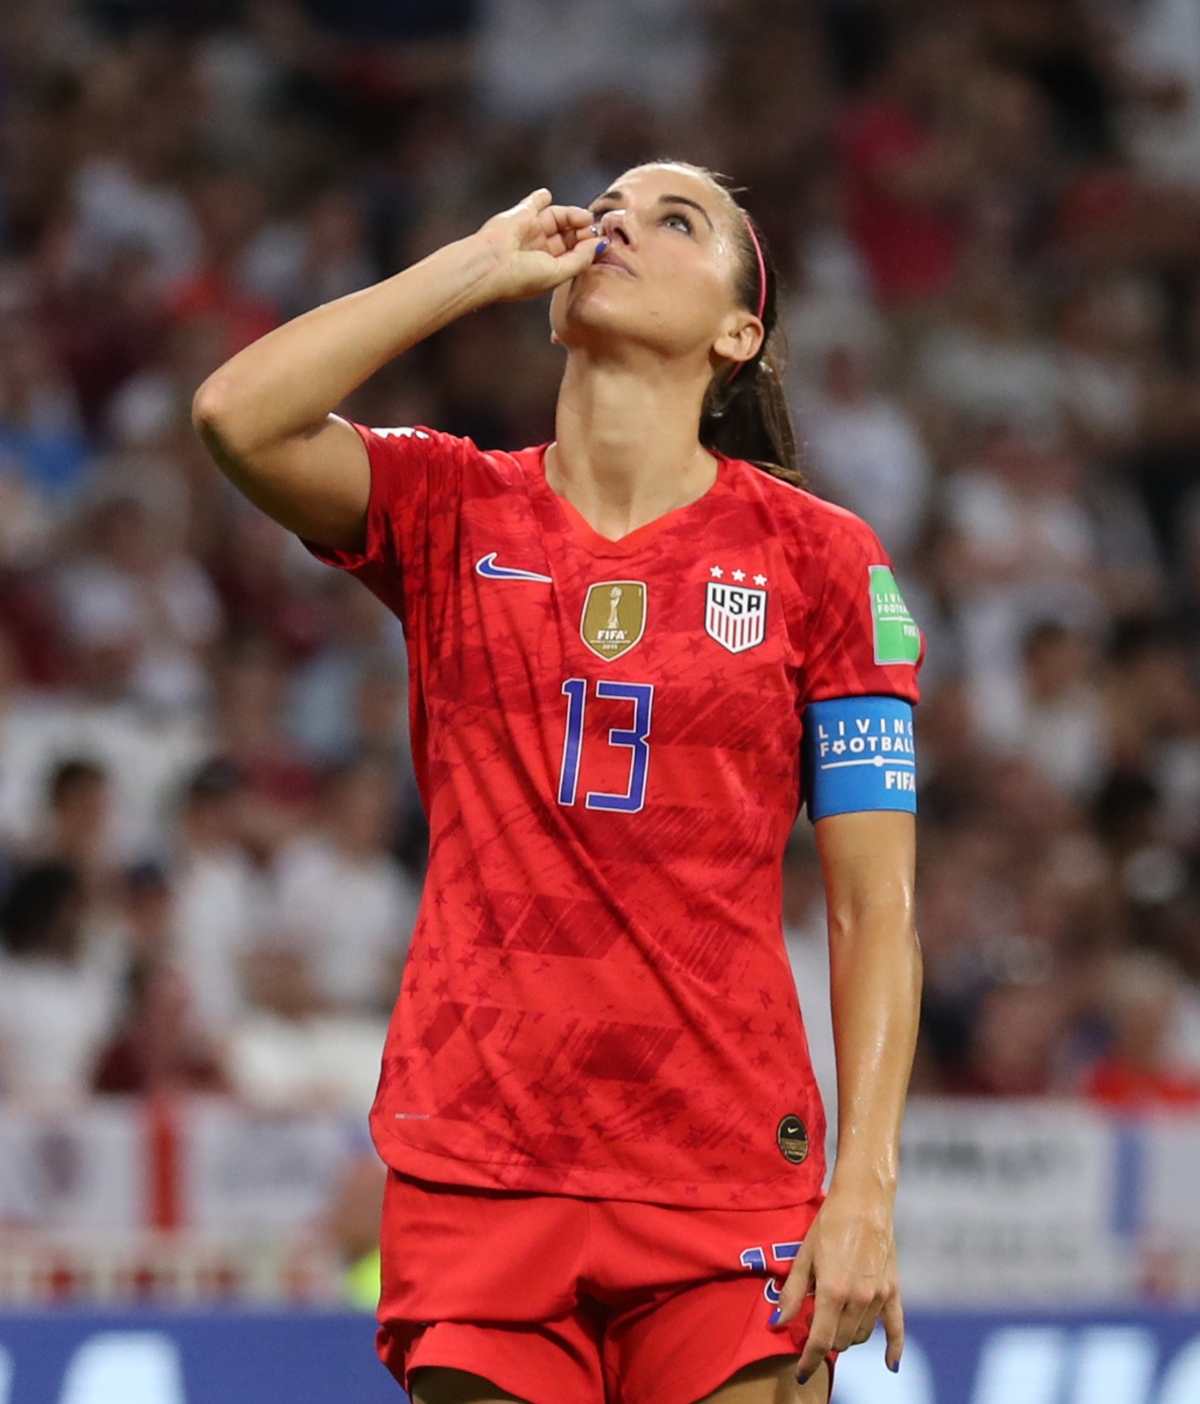 Women's World Cup Soccer Star Alex Causes Uproar With Tea